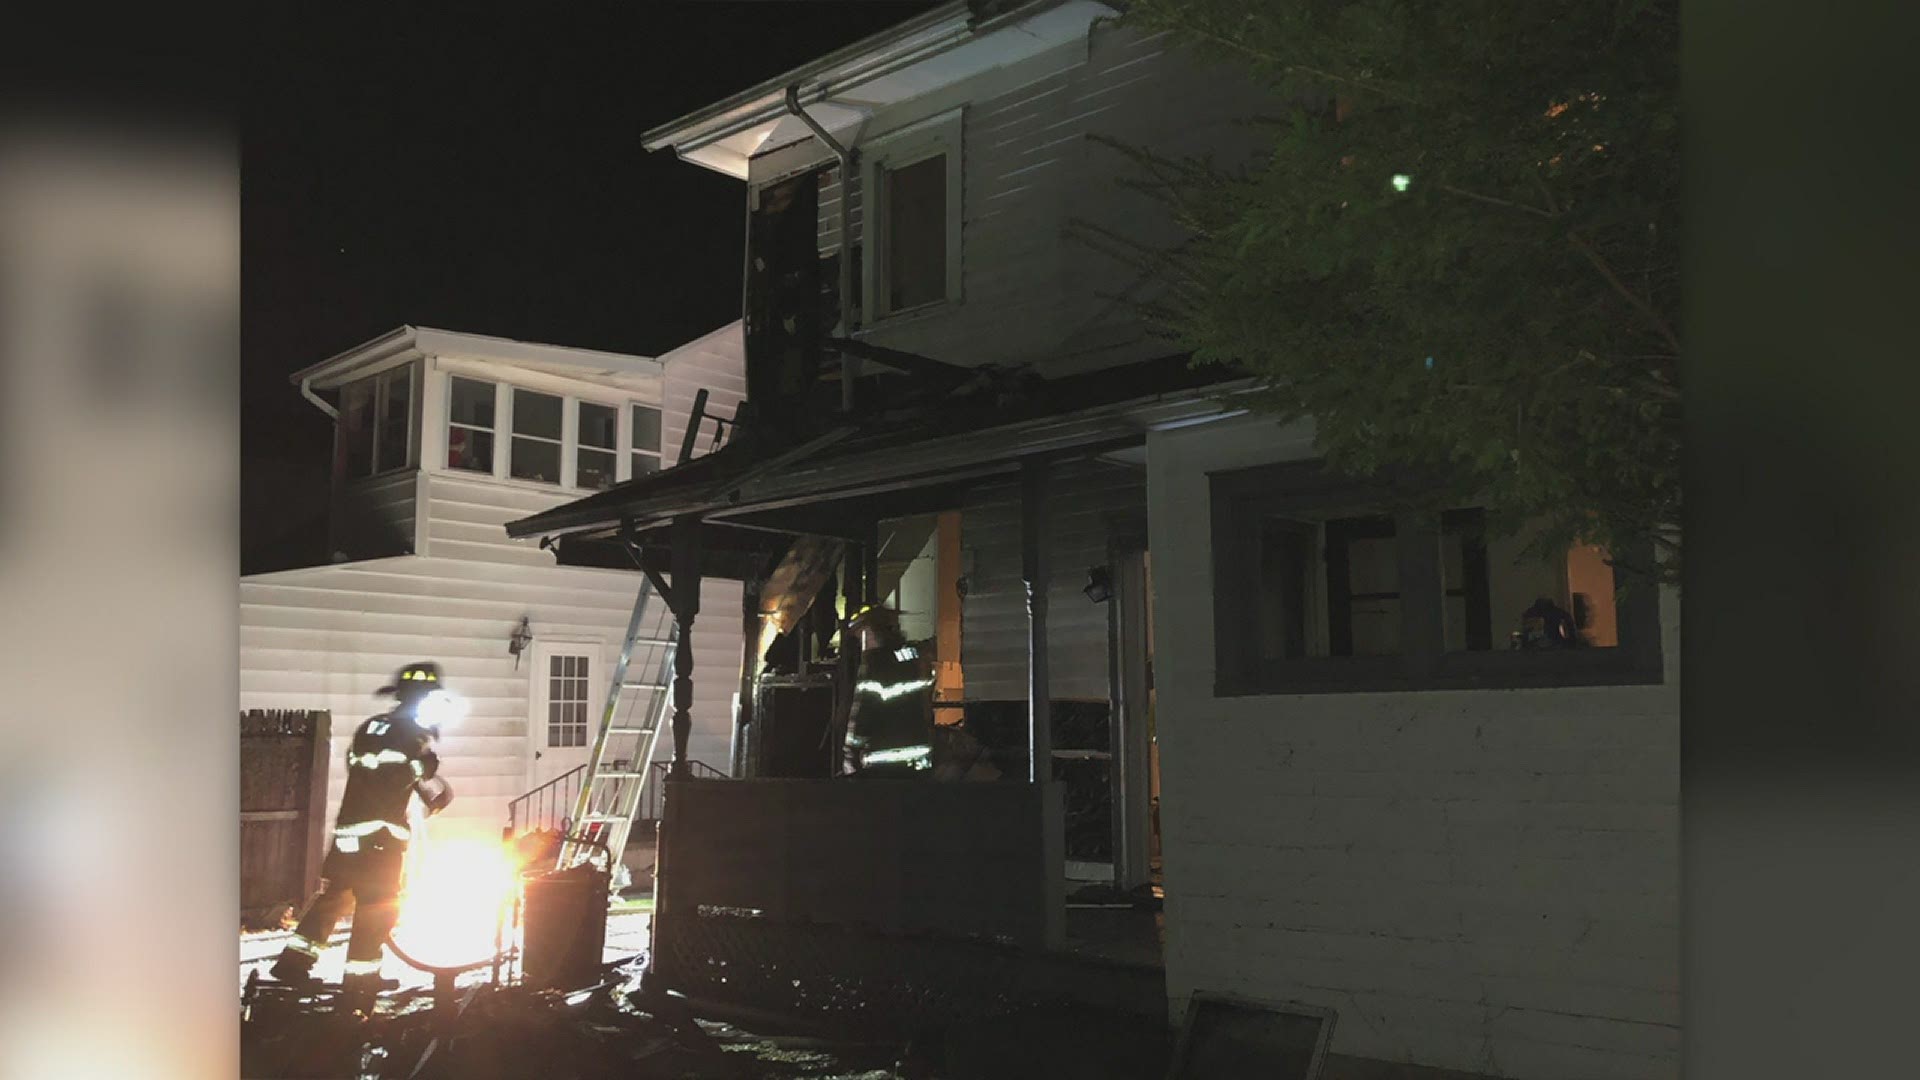 Four children and two adults made it out safely after a fire at the home on South Franklin Street.